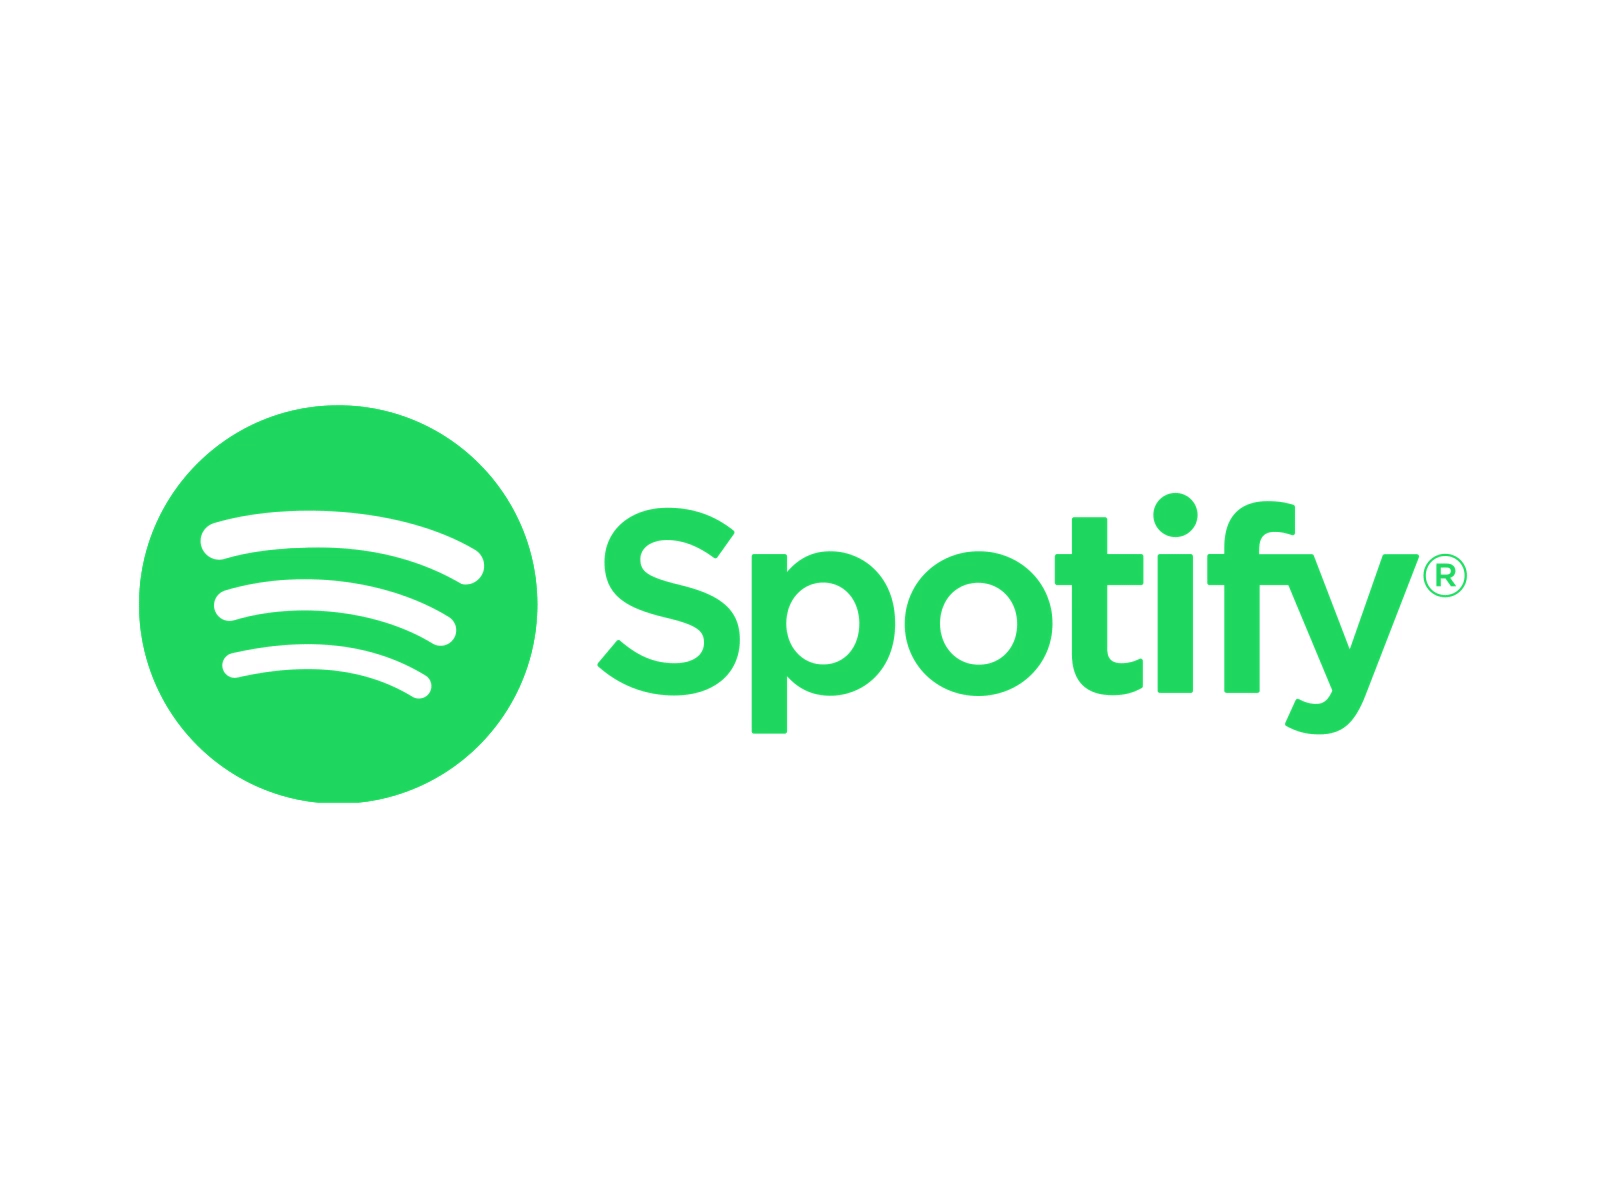 A logo that combines the spotify logo with a neon effect